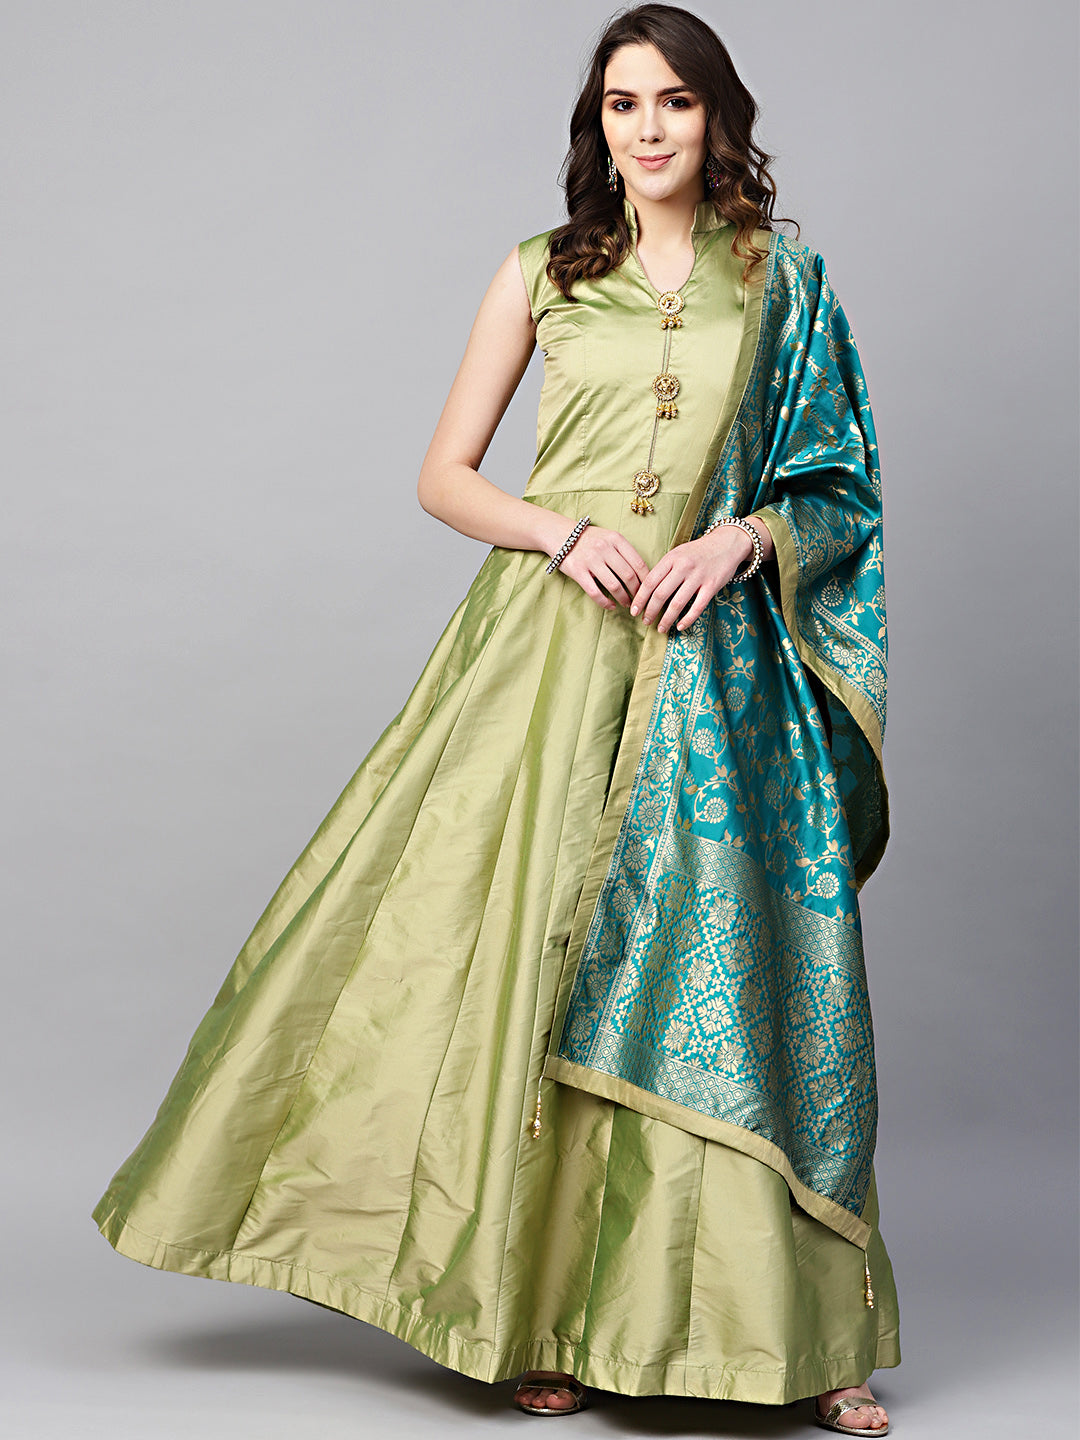 Ethnic Gowns | Long Gown Dress With Banarasi Dupatta | Freeup